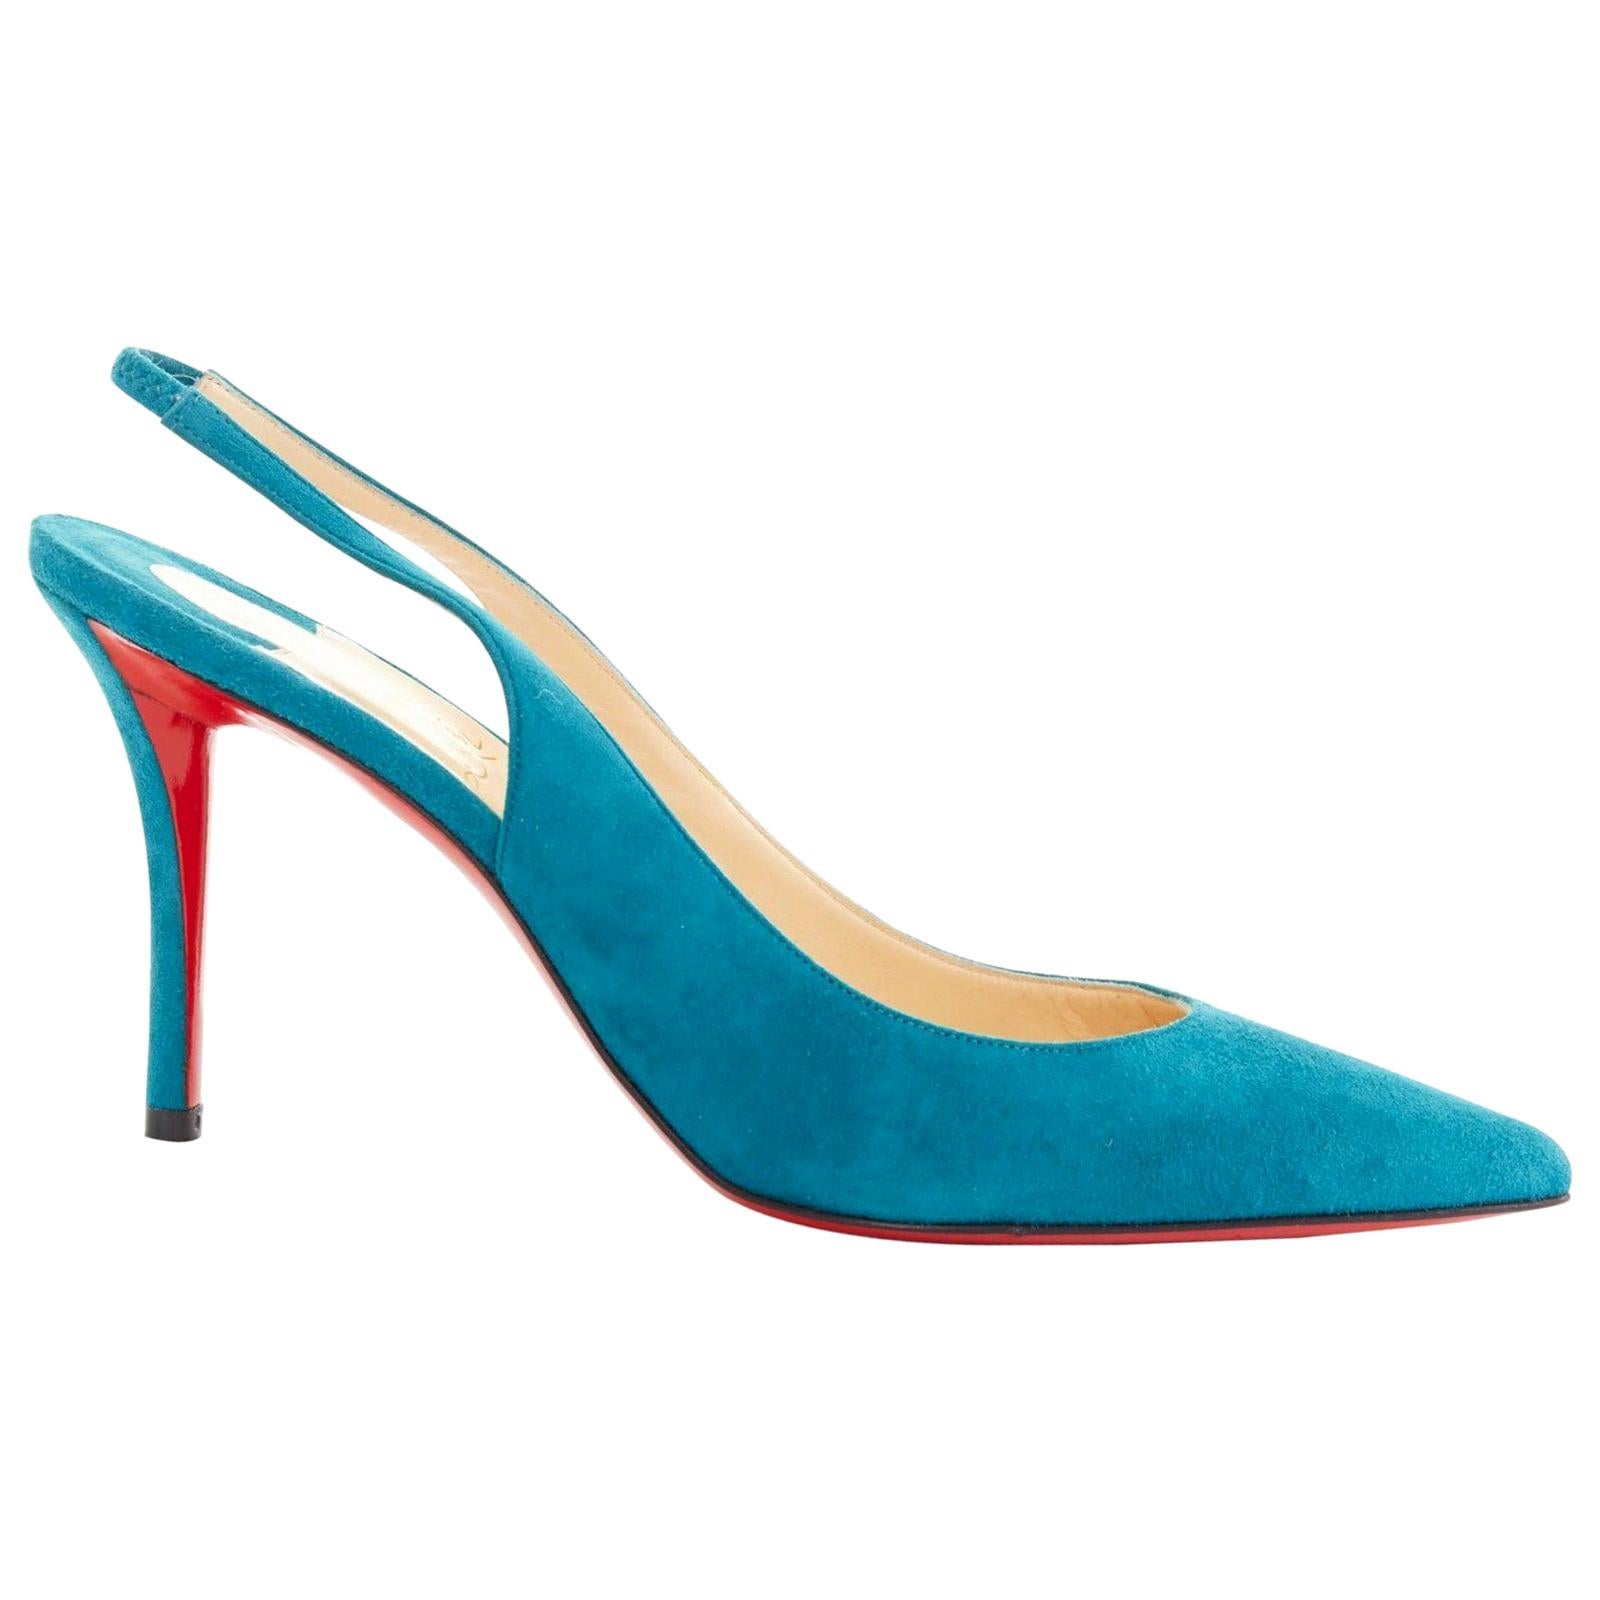 new CHRISTIAN LOUBOUTIN Apostrophy Sling blue suede pointy slingback heel EU39